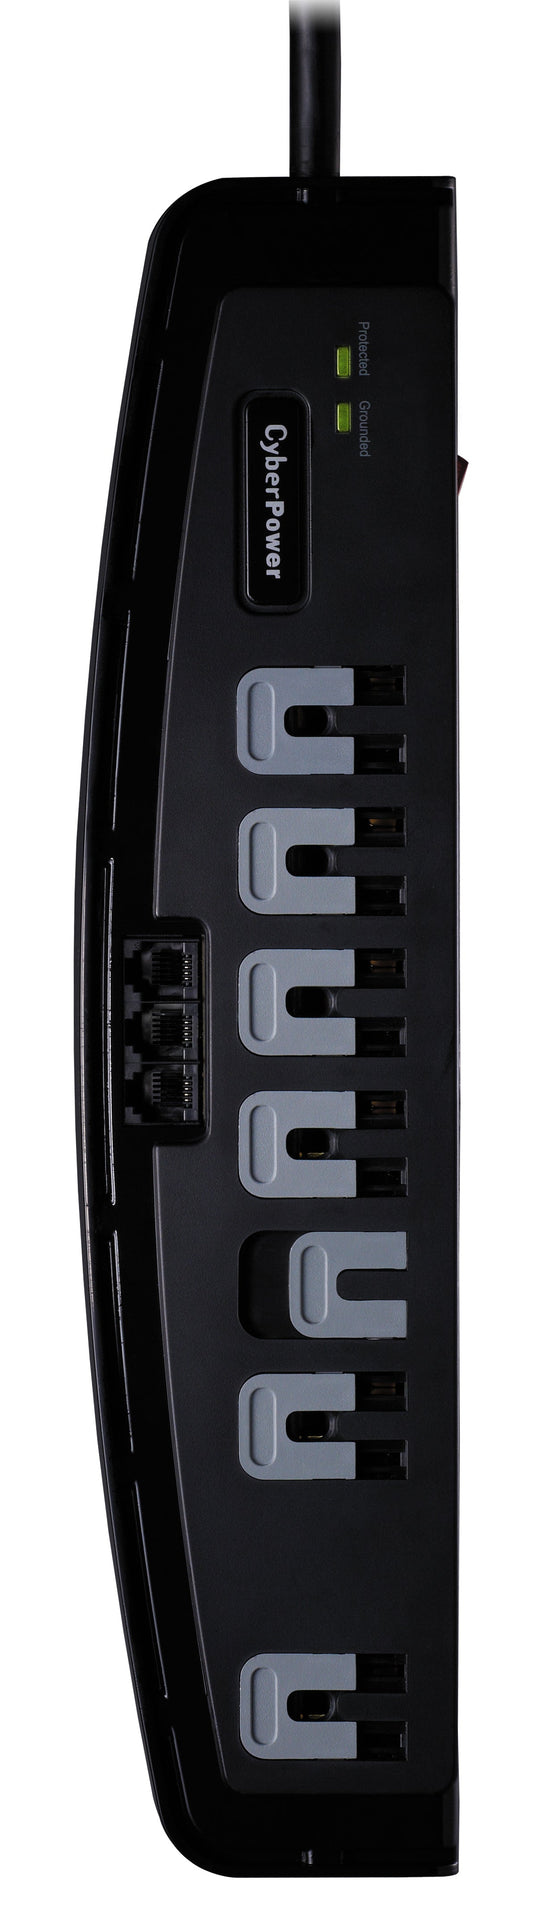 Cyberpower Csp706T Surge Protector Black 7 Ac Outlet(S) 125 V 1.8 M